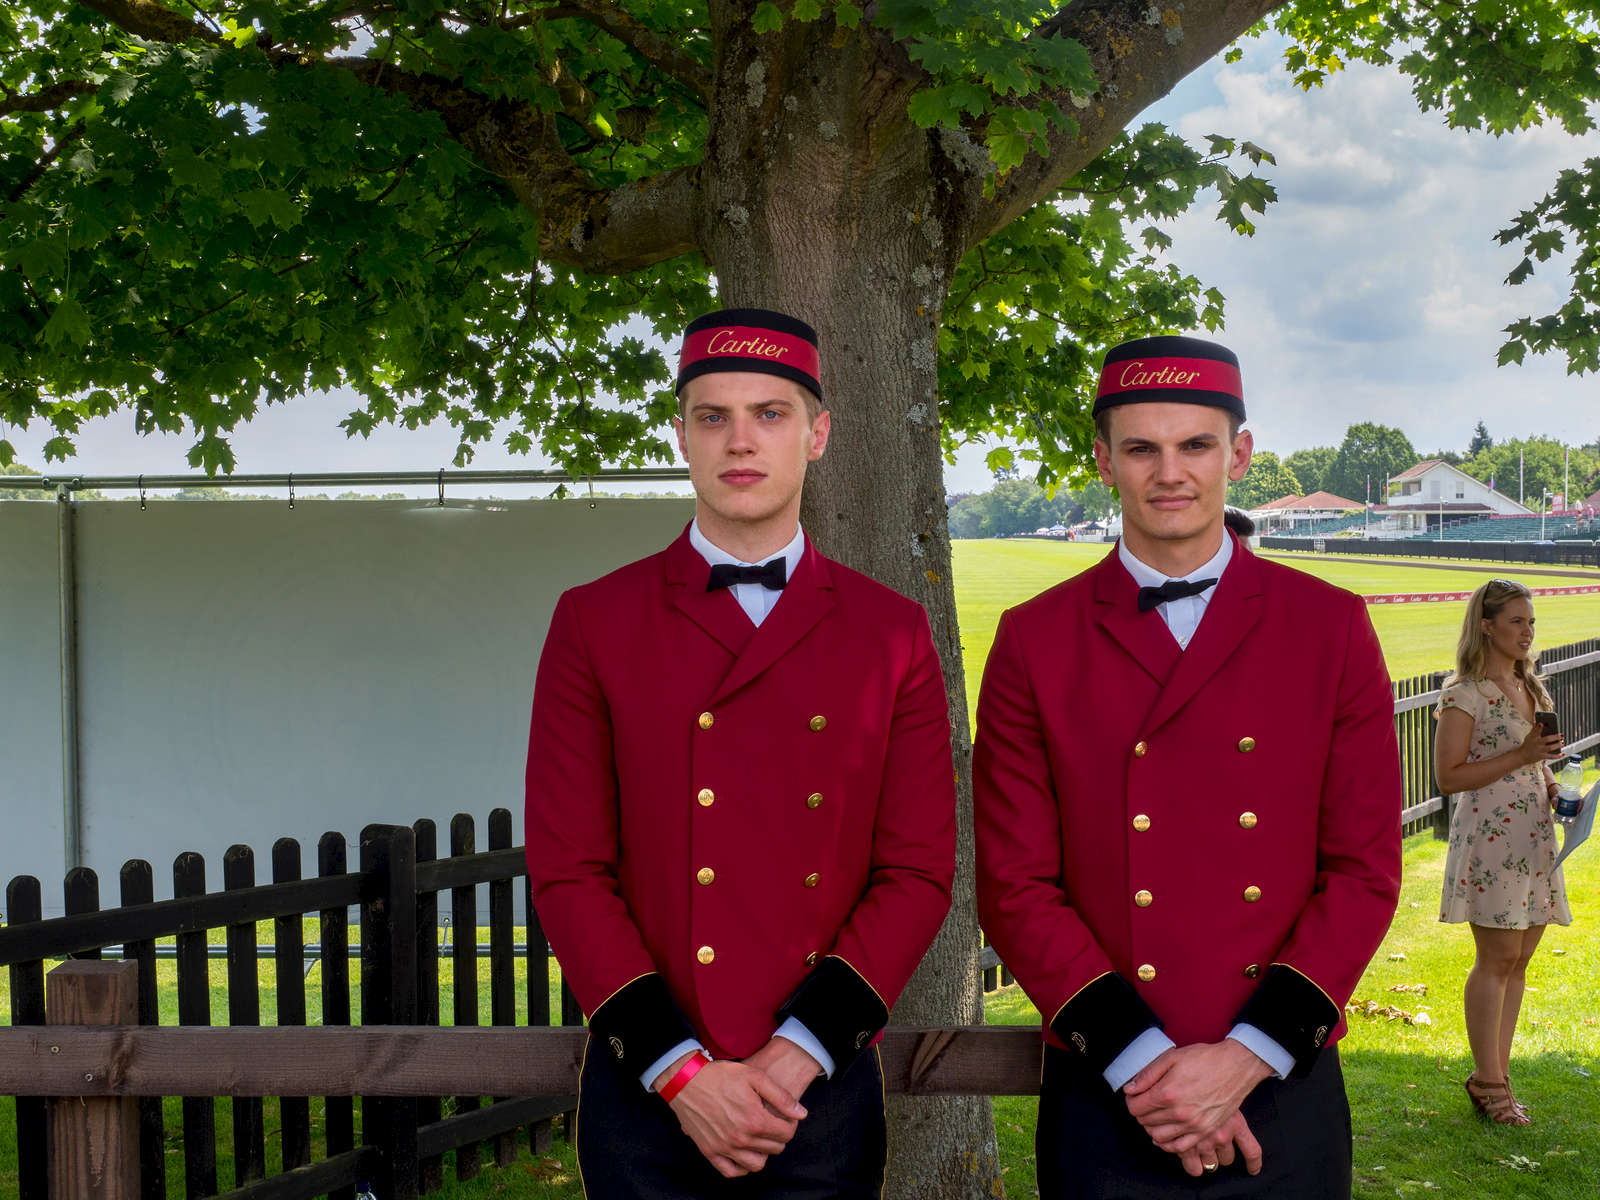 Cartier employees wait to open car doors for visitors to the prestigious VIP marquee.The 2017 Cartier Queen's Cup Final was played at the Guards Polo Club located in Windsor Great Park.